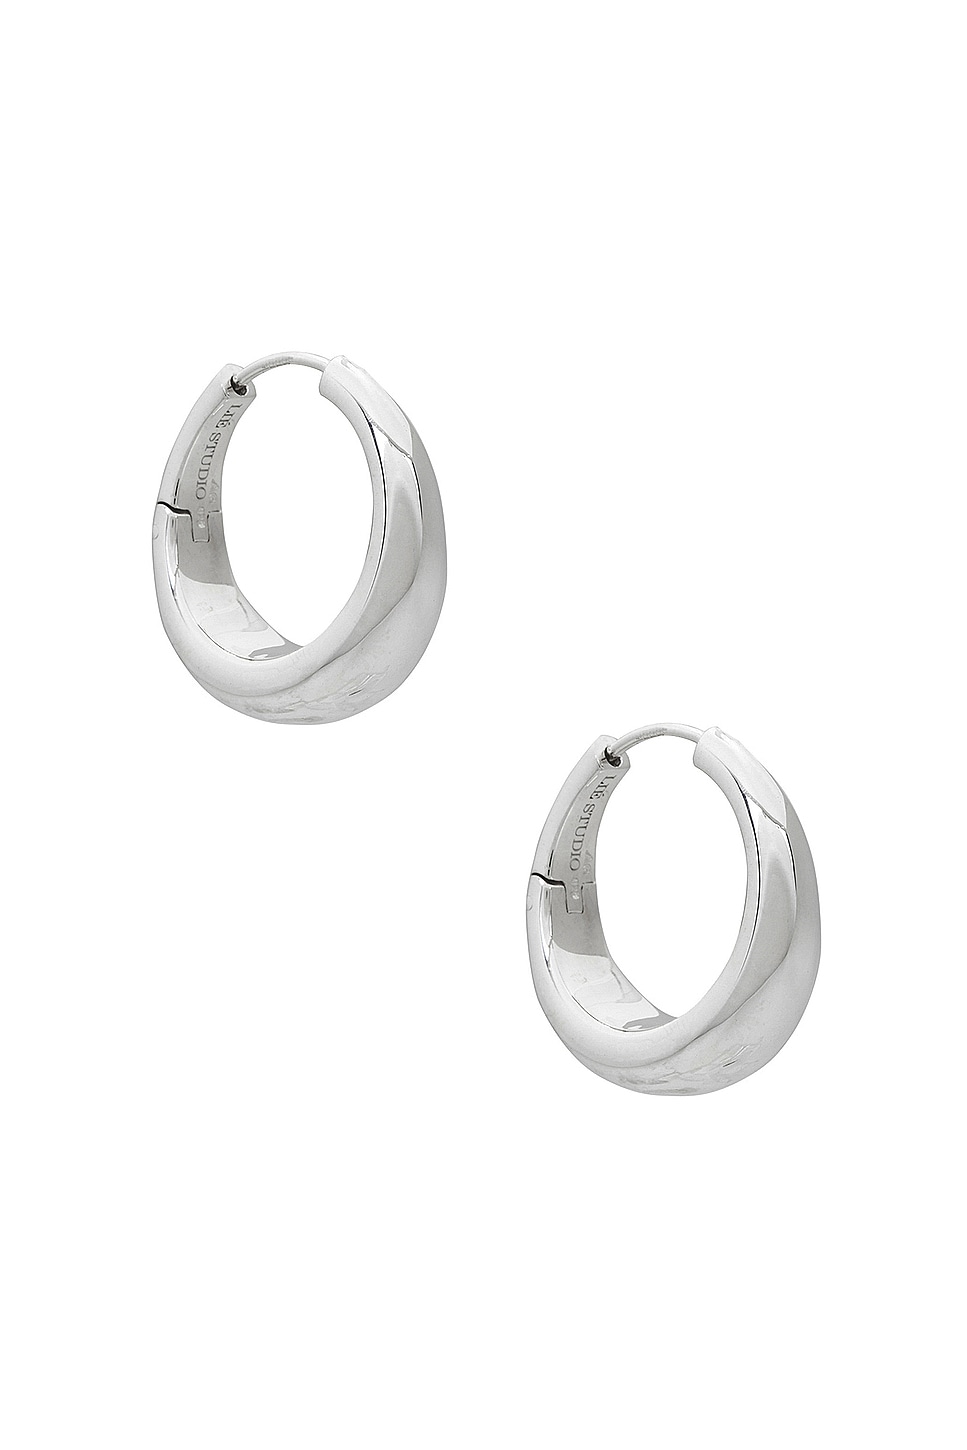 Image 1 of Lie Studio The Andrea Earring in Sterling Silver